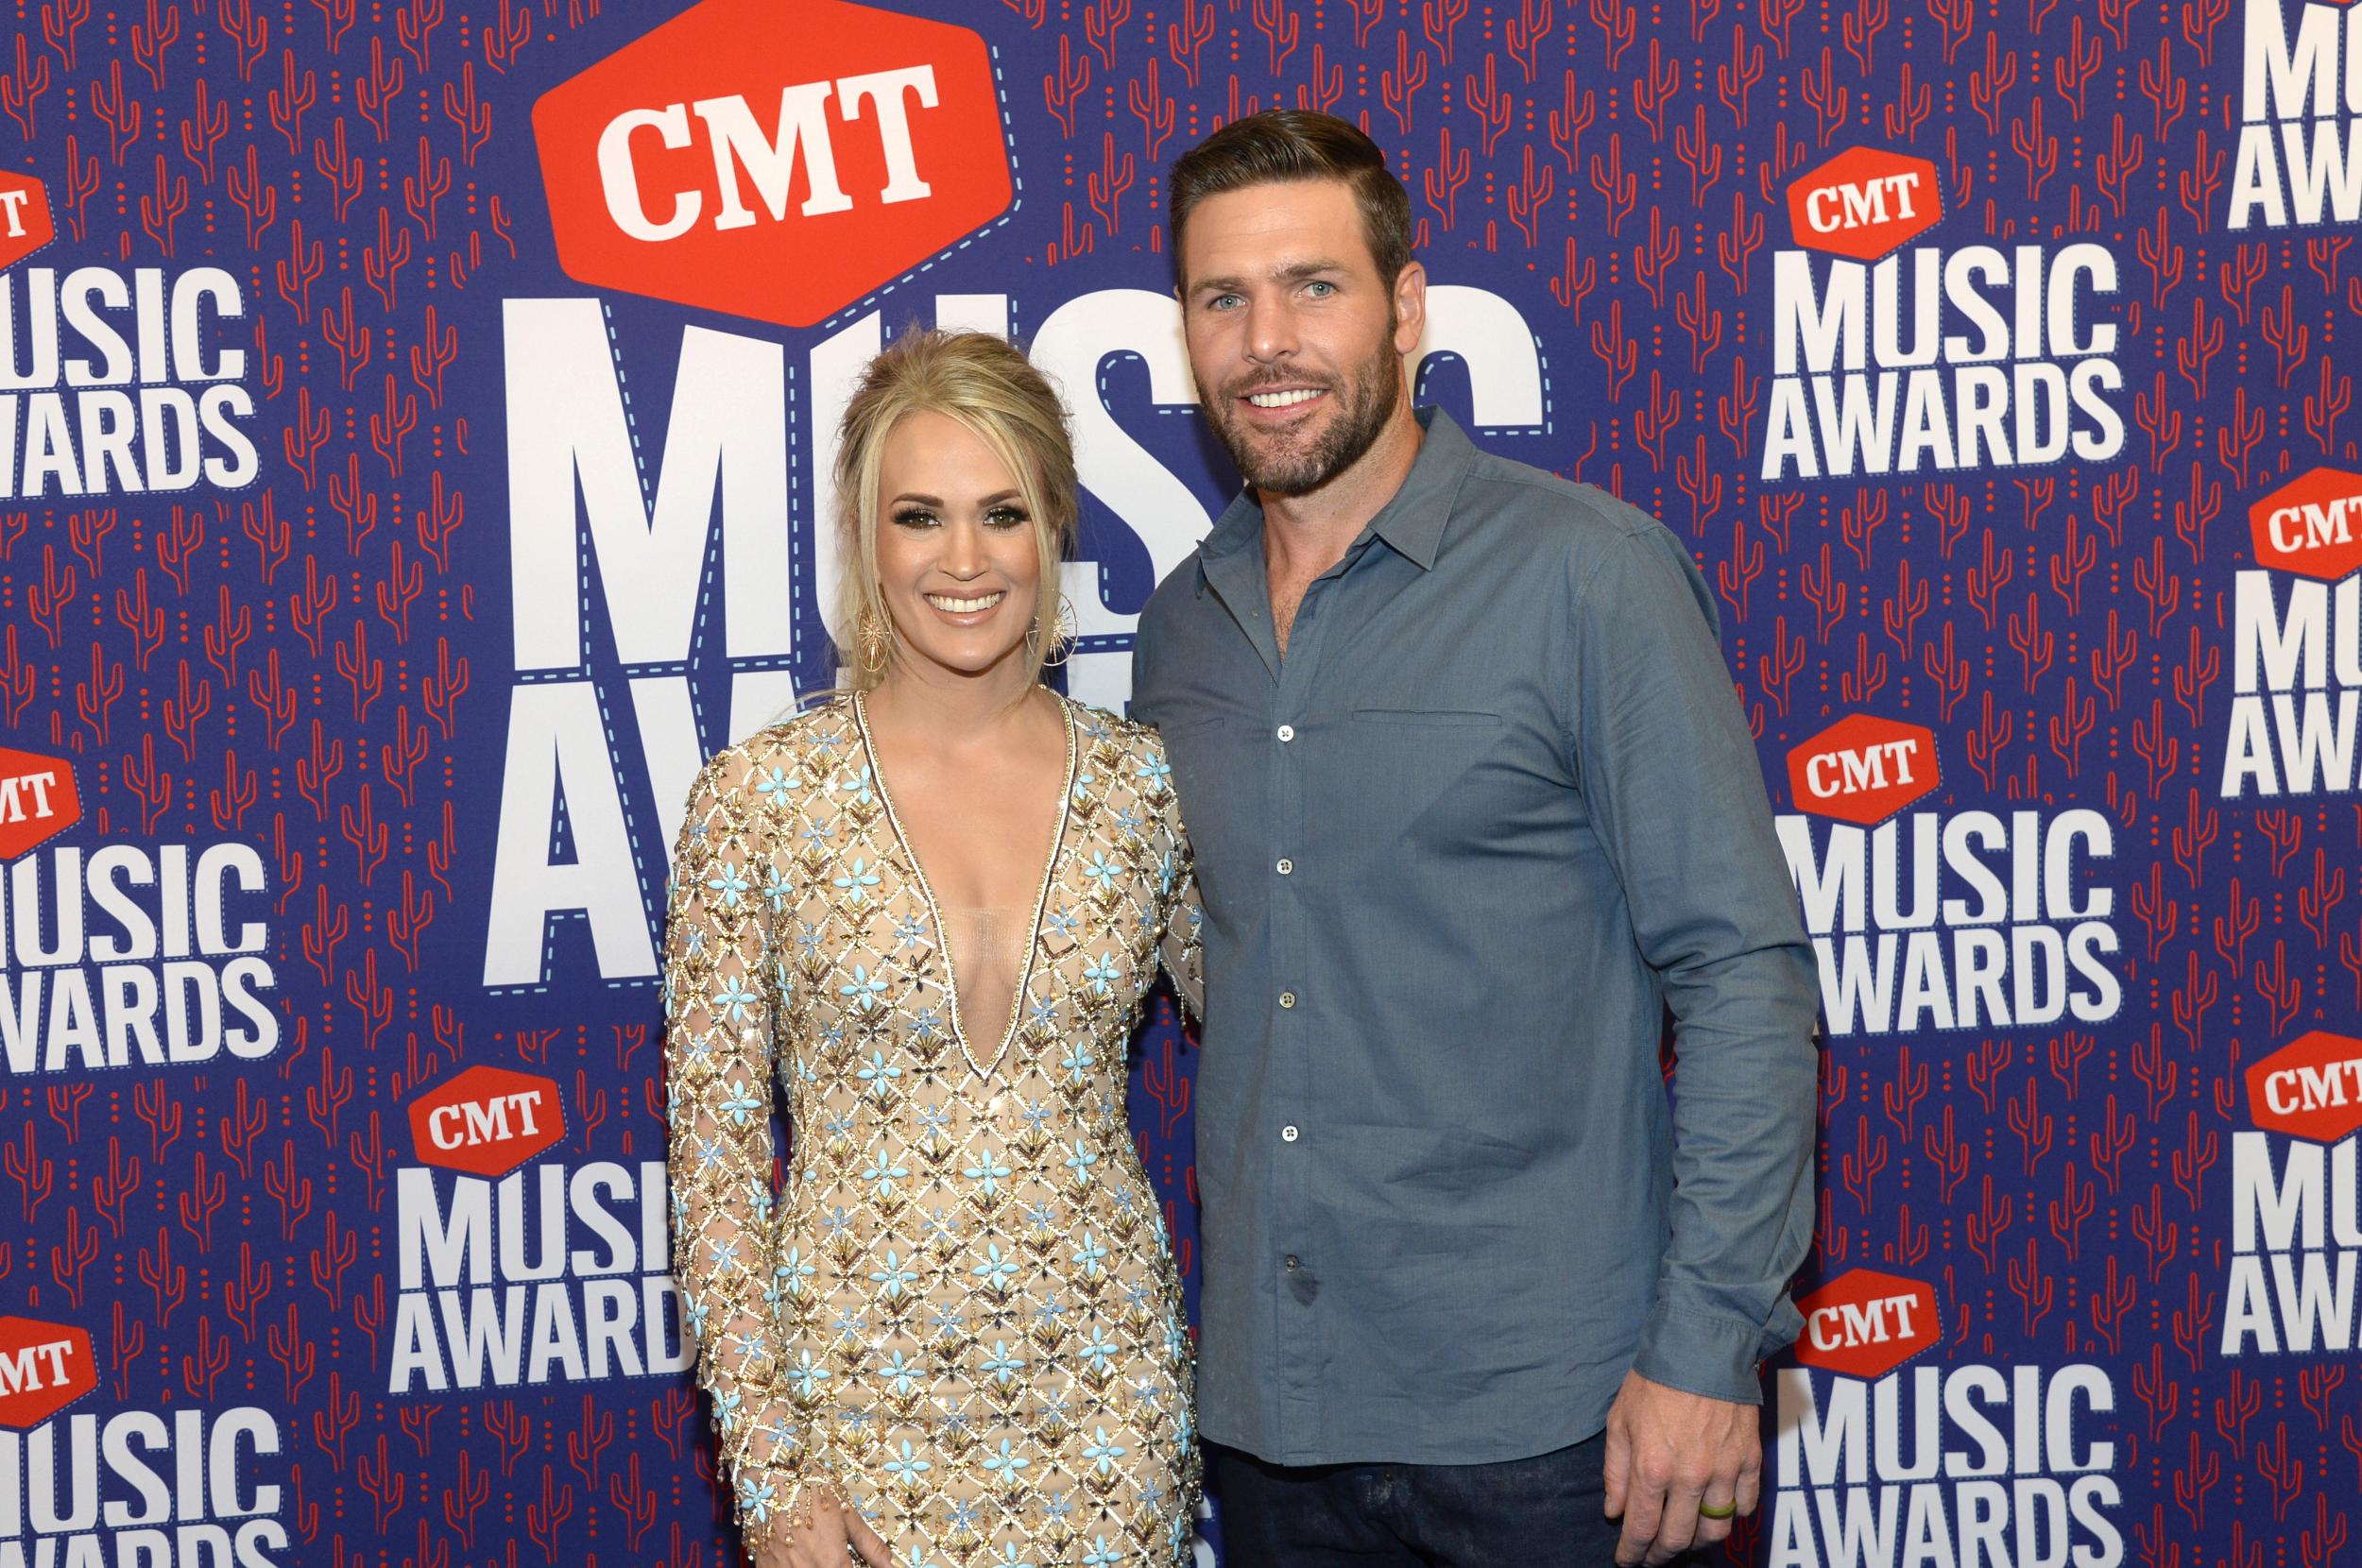 Carrie Underwood has revealed her husband Mike Fisher was forced to shelter with their children